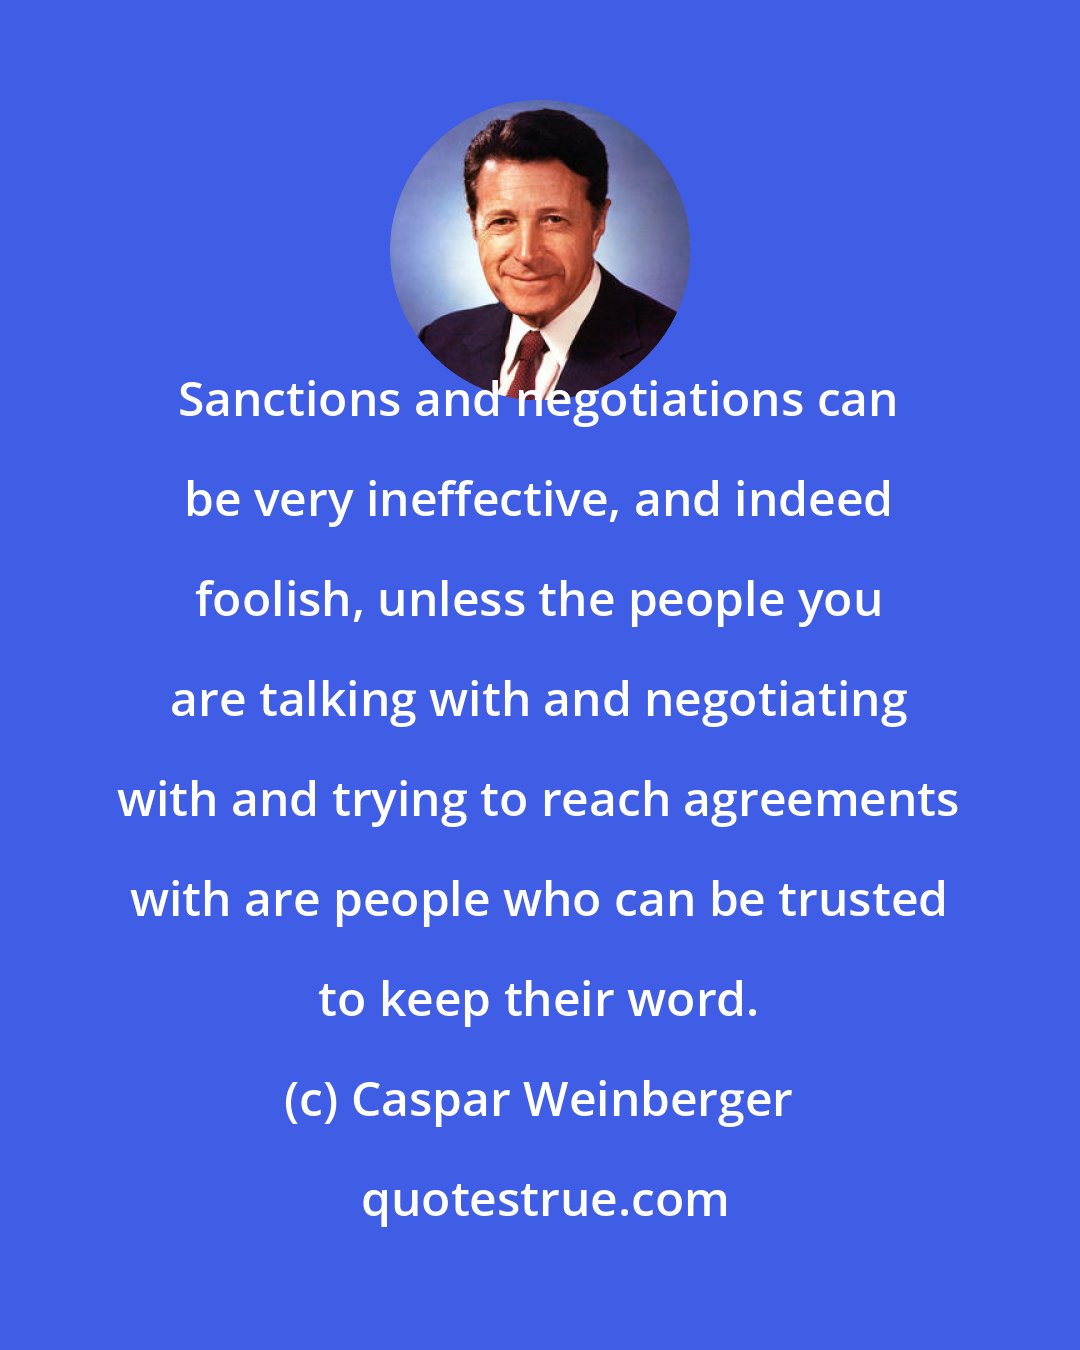 Caspar Weinberger: Sanctions and negotiations can be very ineffective, and indeed foolish, unless the people you are talking with and negotiating with and trying to reach agreements with are people who can be trusted to keep their word.